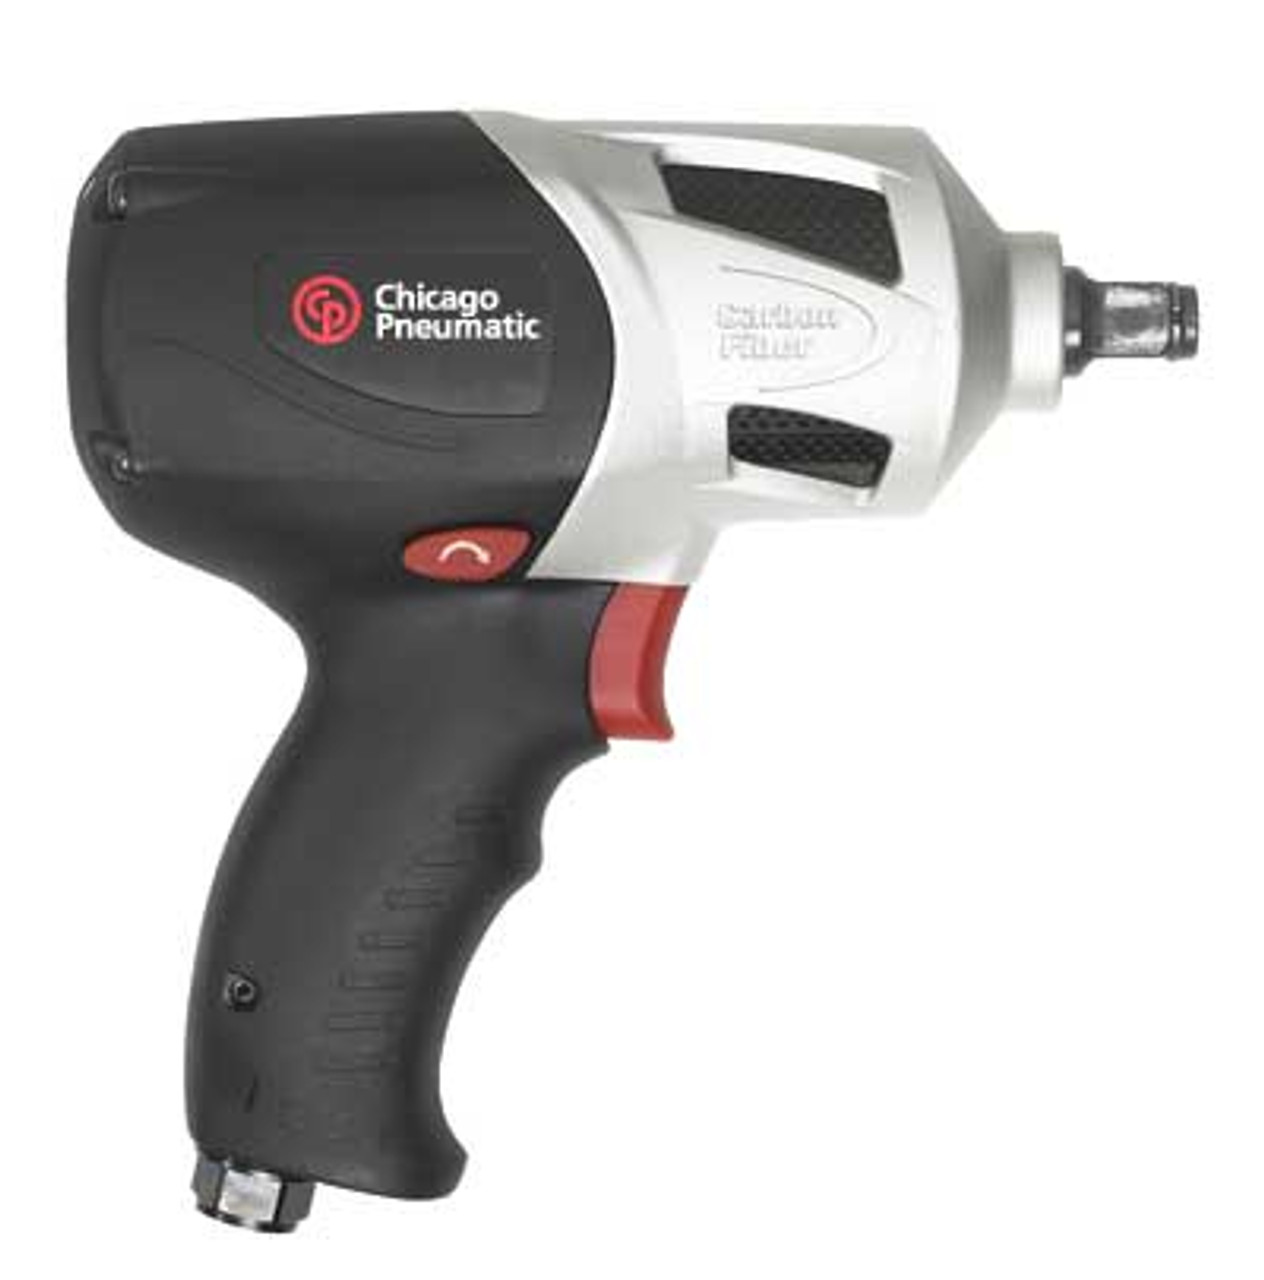 Chicago Pneumatic 1/2 in. Impact Wrench